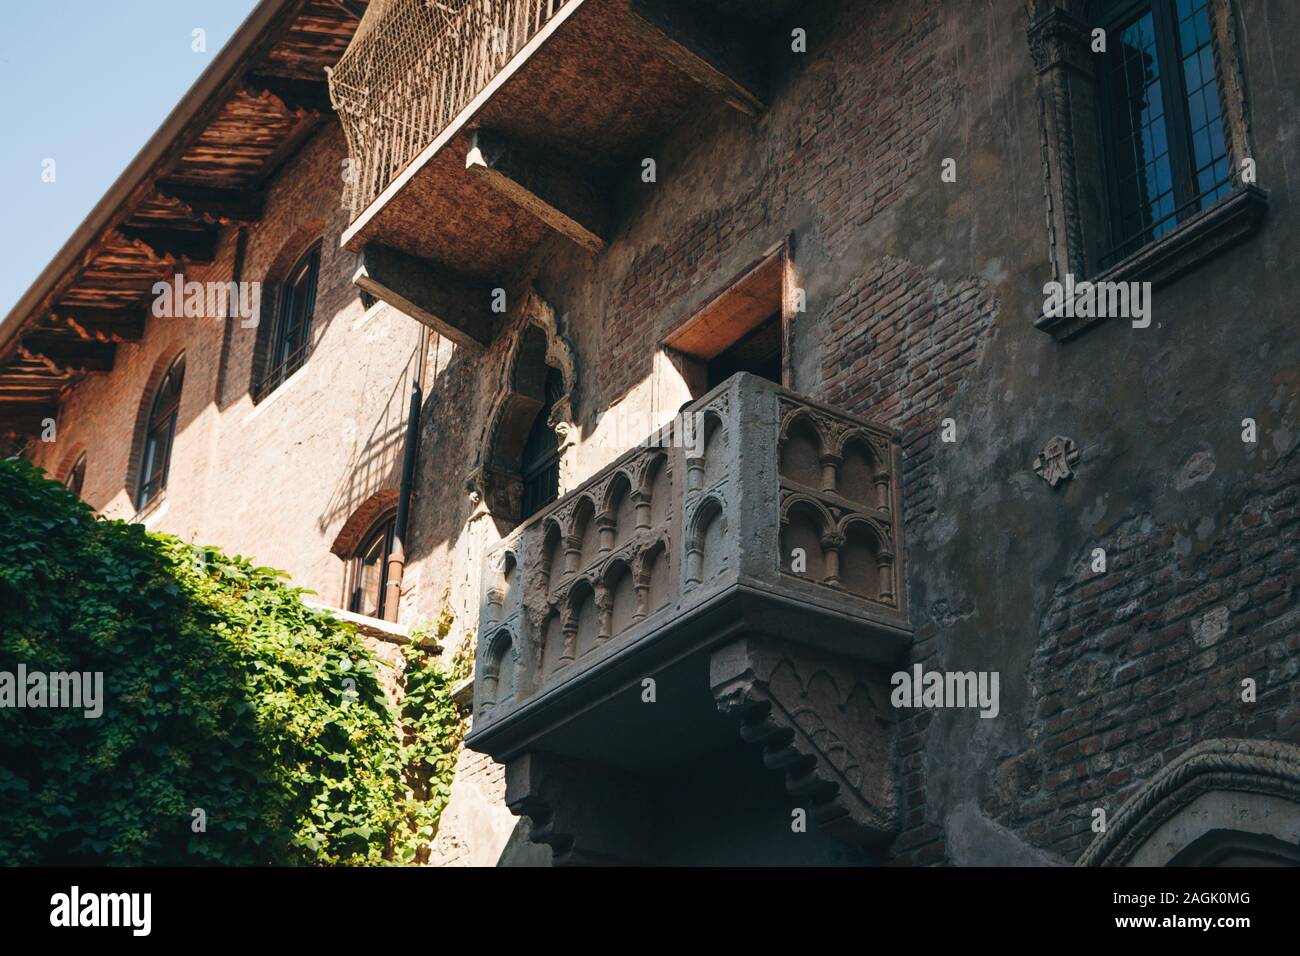 Balcony of Romeo and Juliet in Verona in Italy. One of the famous city attractions. Stock Photo